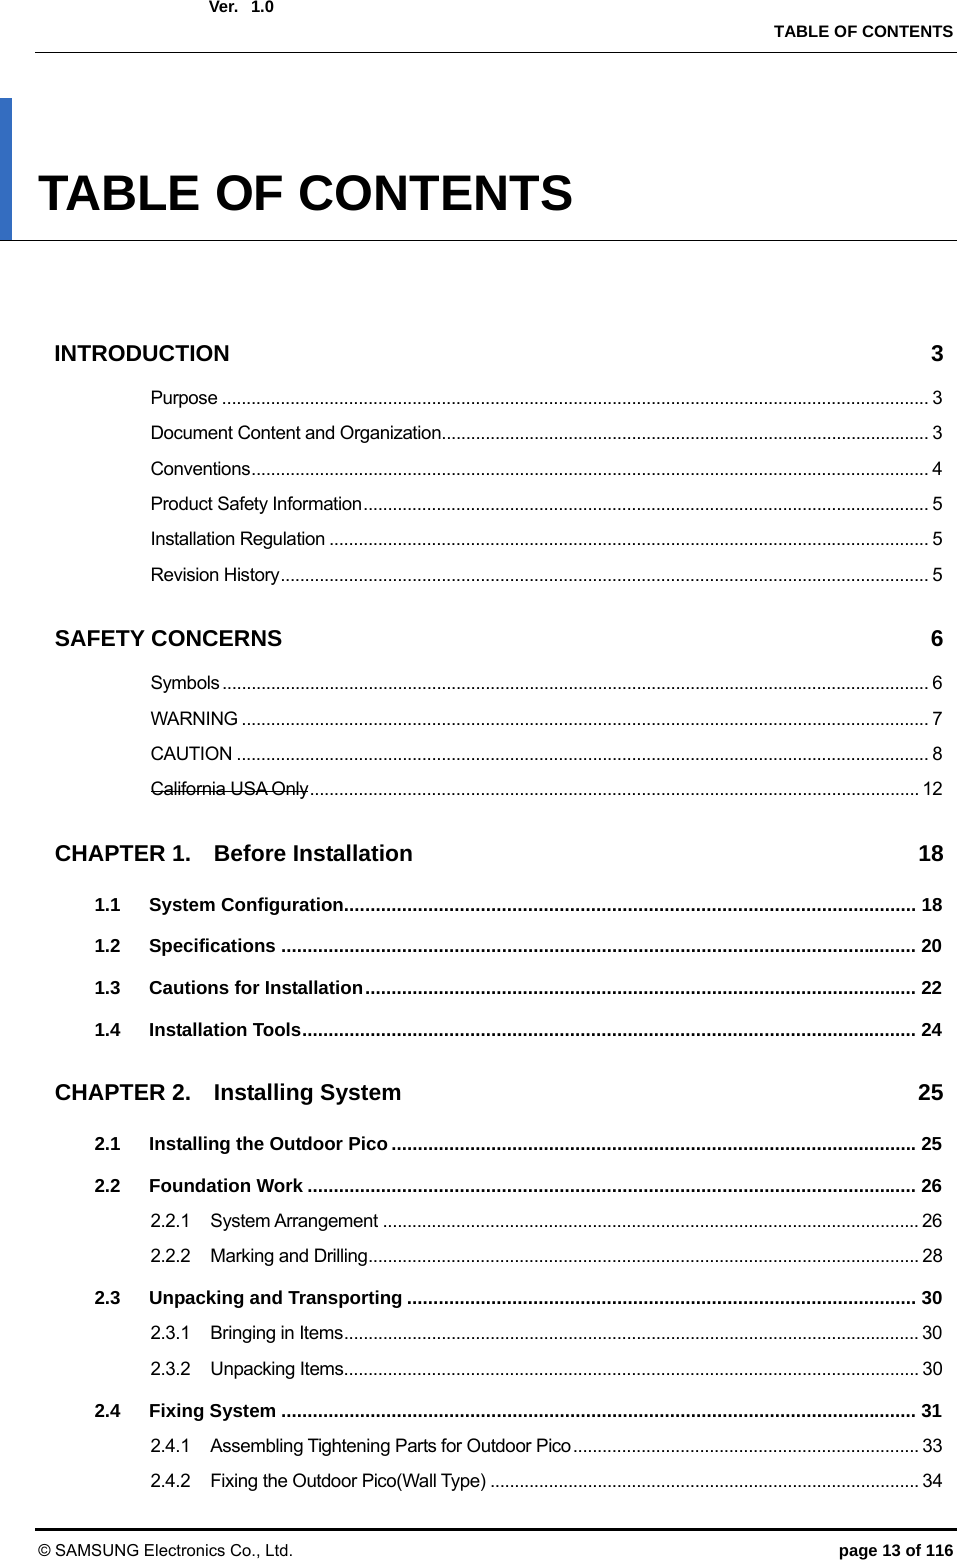  Ver.   TABLE OF CONTENTS © SAMSUNG Electronics Co., Ltd.  page 13 of 116 1.0 TABLE OF CONTENTS   INTRODUCTION 3 Purpose ................................................................................................................................................. 3 Document Content and Organization.................................................................................................... 3 Conventions ........................................................................................................................................... 4 Product Safety Information .................................................................................................................... 5 Installation Regulation ........................................................................................................................... 5 Revision History ..................................................................................................................................... 5 SAFETY CONCERNS  6 Symbols ................................................................................................................................................. 6 WARNING ............................................................................................................................................. 7 CAUTION .............................................................................................................................................. 8 California USA Only ............................................................................................................................. 12 CHAPTER 1. Before Installation  18 1.1 System Configuration ............................................................................................................. 18 1.2 Specifications ......................................................................................................................... 20 1.3 Cautions for Installation ......................................................................................................... 22 1.4 Installation Tools ..................................................................................................................... 24 CHAPTER 2. Installing System  25 2.1 Installing the Outdoor Pico .................................................................................................... 25 2.2 Foundation Work .................................................................................................................... 26 2.2.1 System Arrangement .............................................................................................................. 26 2.2.2 Marking and Drilling ................................................................................................................. 28 2.3 Unpacking and Transporting ................................................................................................. 30 2.3.1 Bringing in Items ...................................................................................................................... 30 2.3.2 Unpacking Items ...................................................................................................................... 30 2.4 Fixing System ......................................................................................................................... 31 2.4.1 Assembling Tightening Parts for Outdoor Pico ....................................................................... 33 2.4.2 Fixing the Outdoor Pico(Wall Type) ........................................................................................ 34 